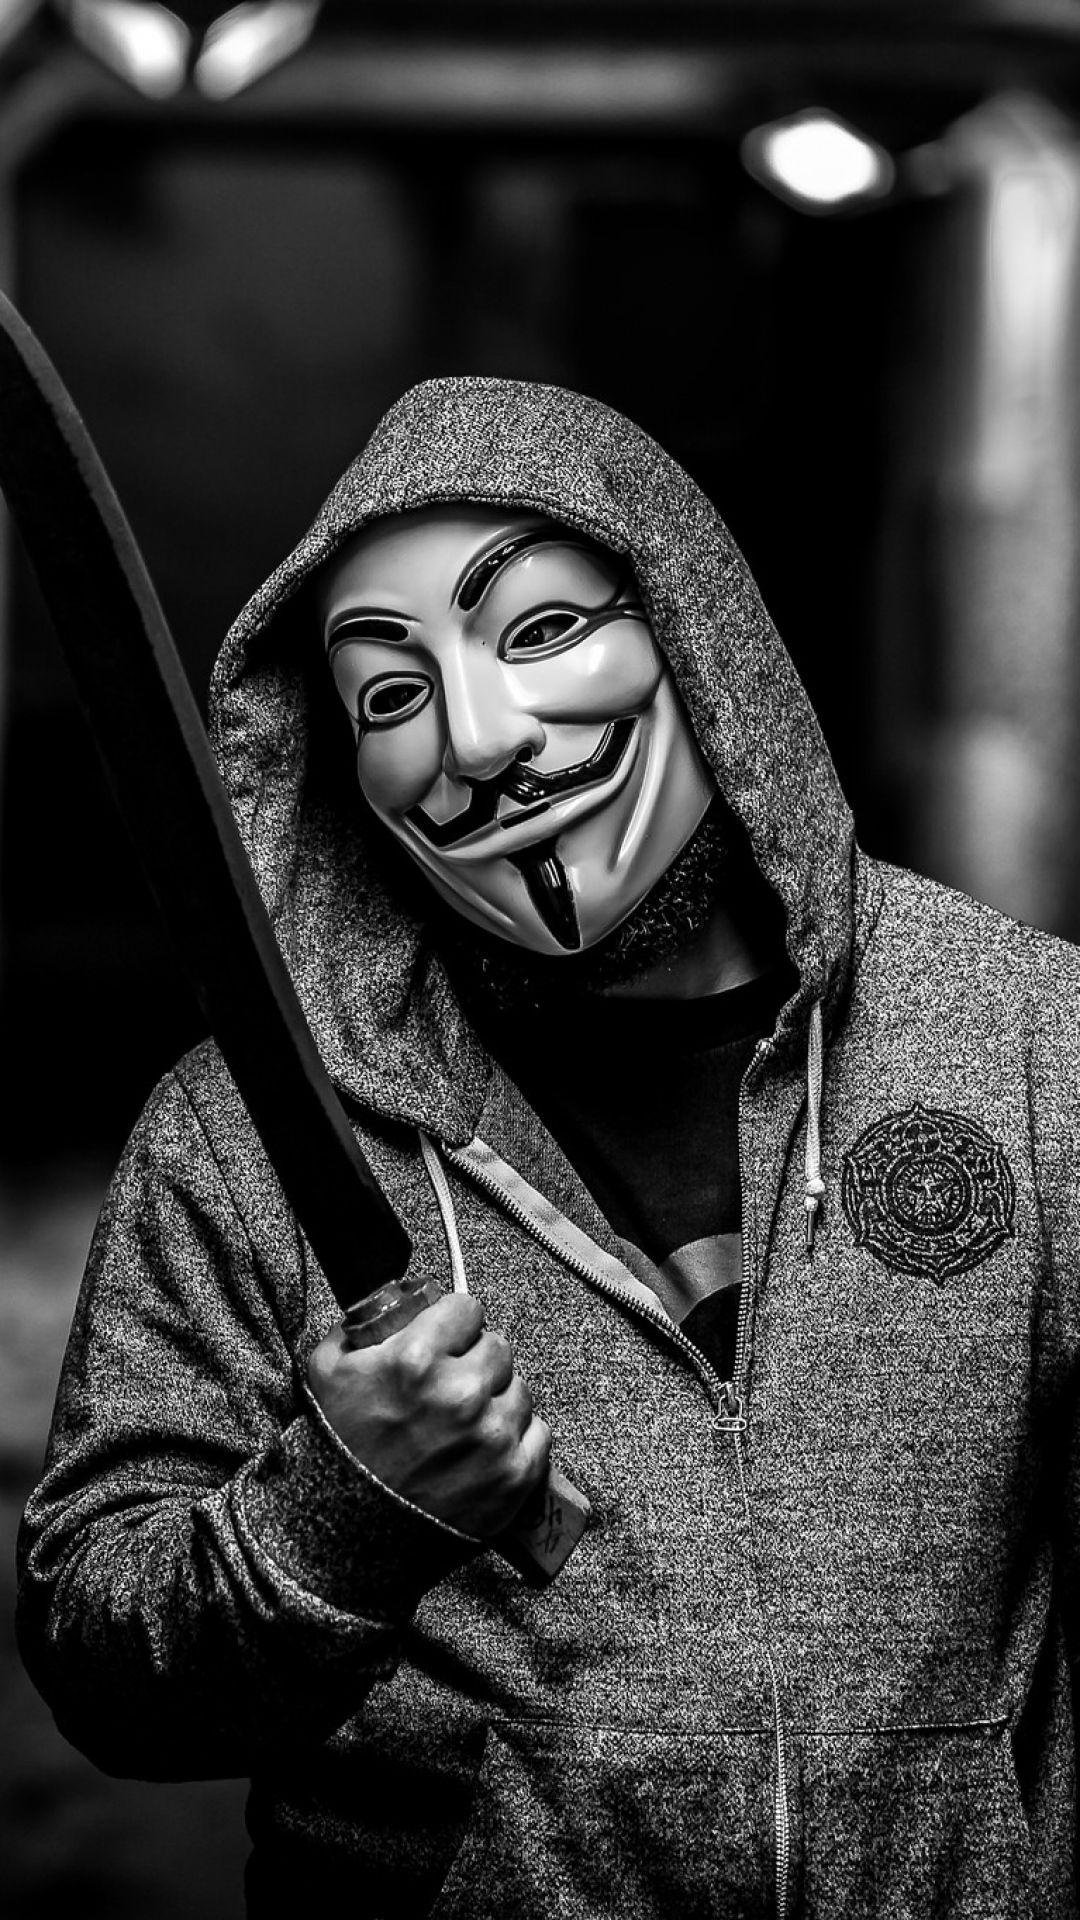 anonymous hackers wallpaper 1080p